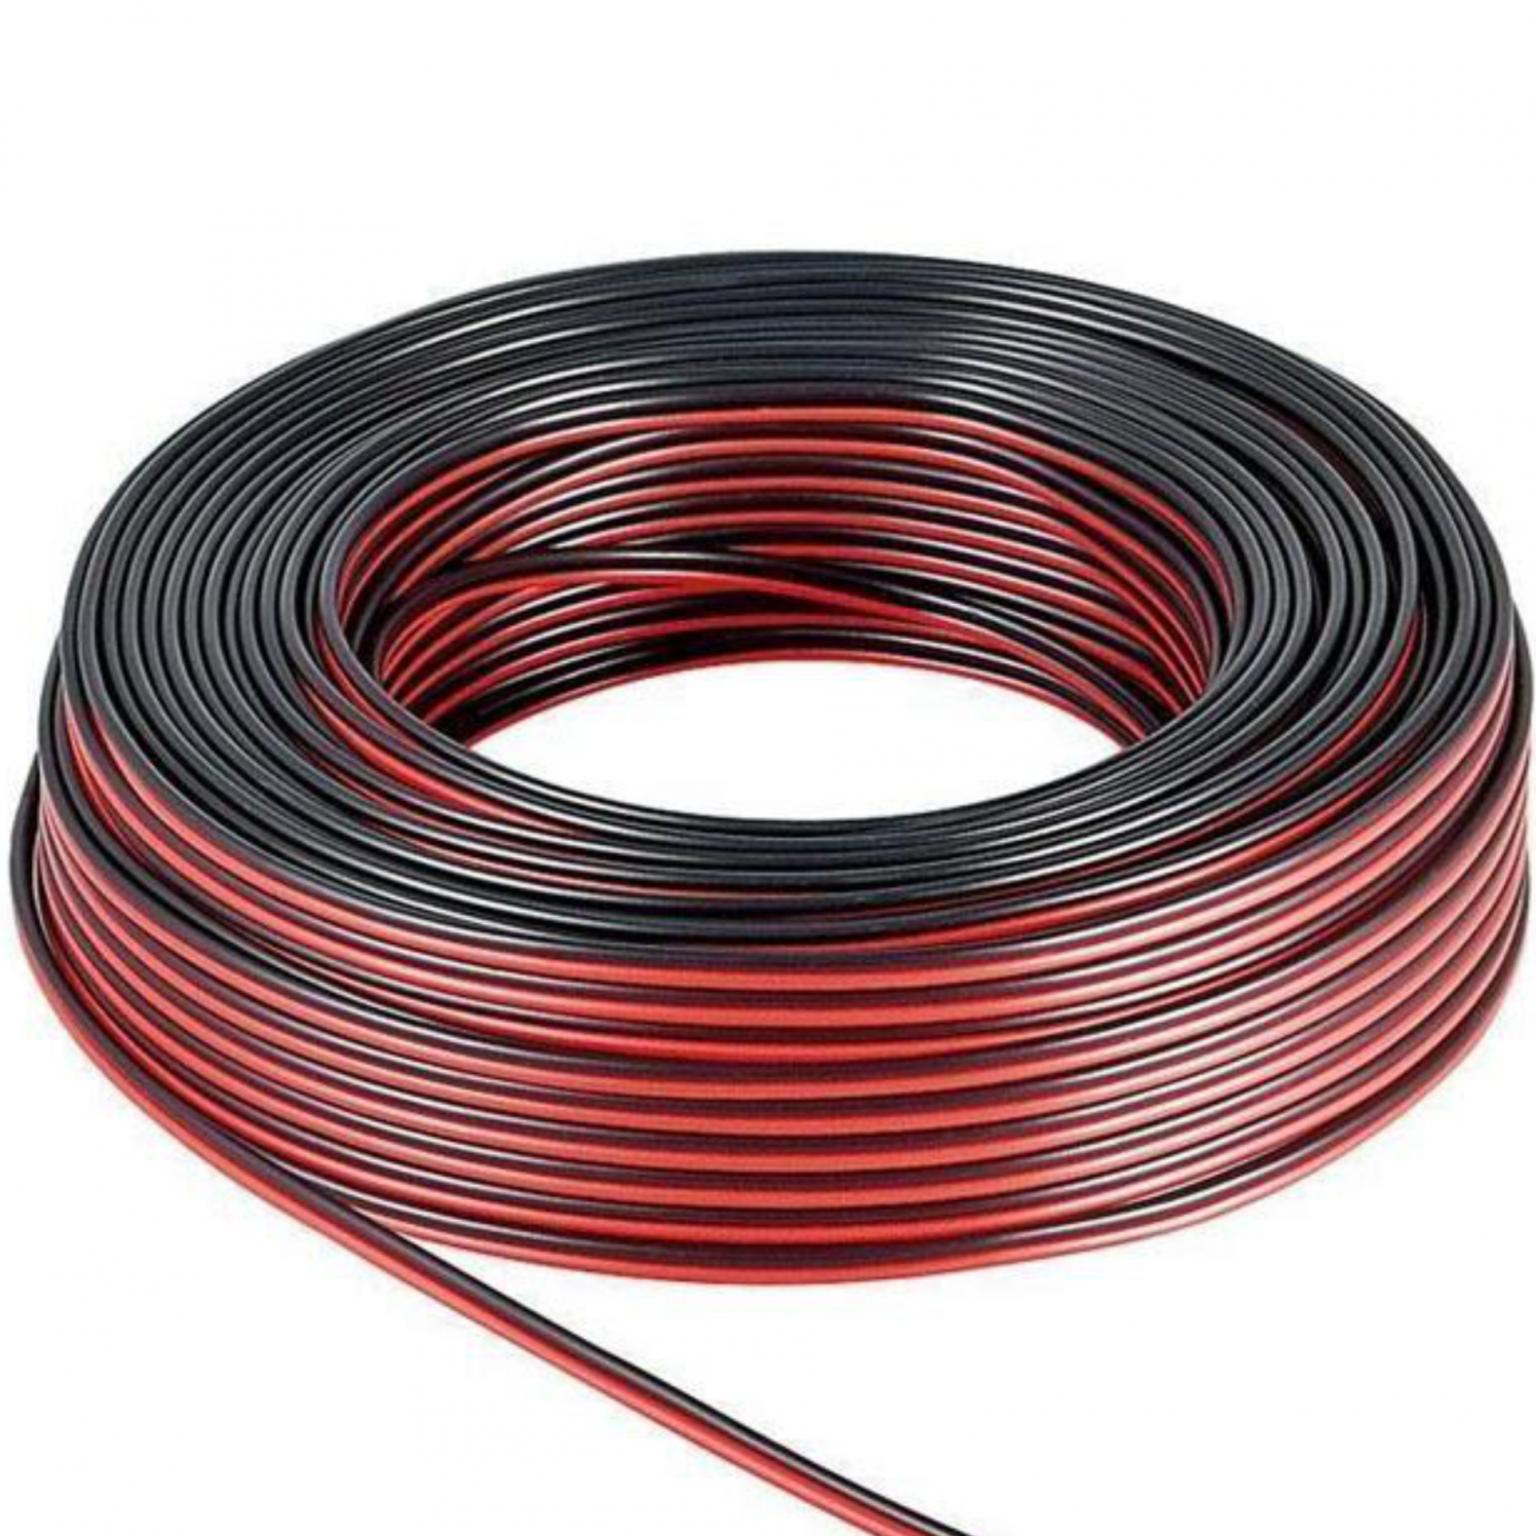 Image of Speaker cable red/black CCA 50 m roll, cable diameter 2 x 4,0 mm? - Go